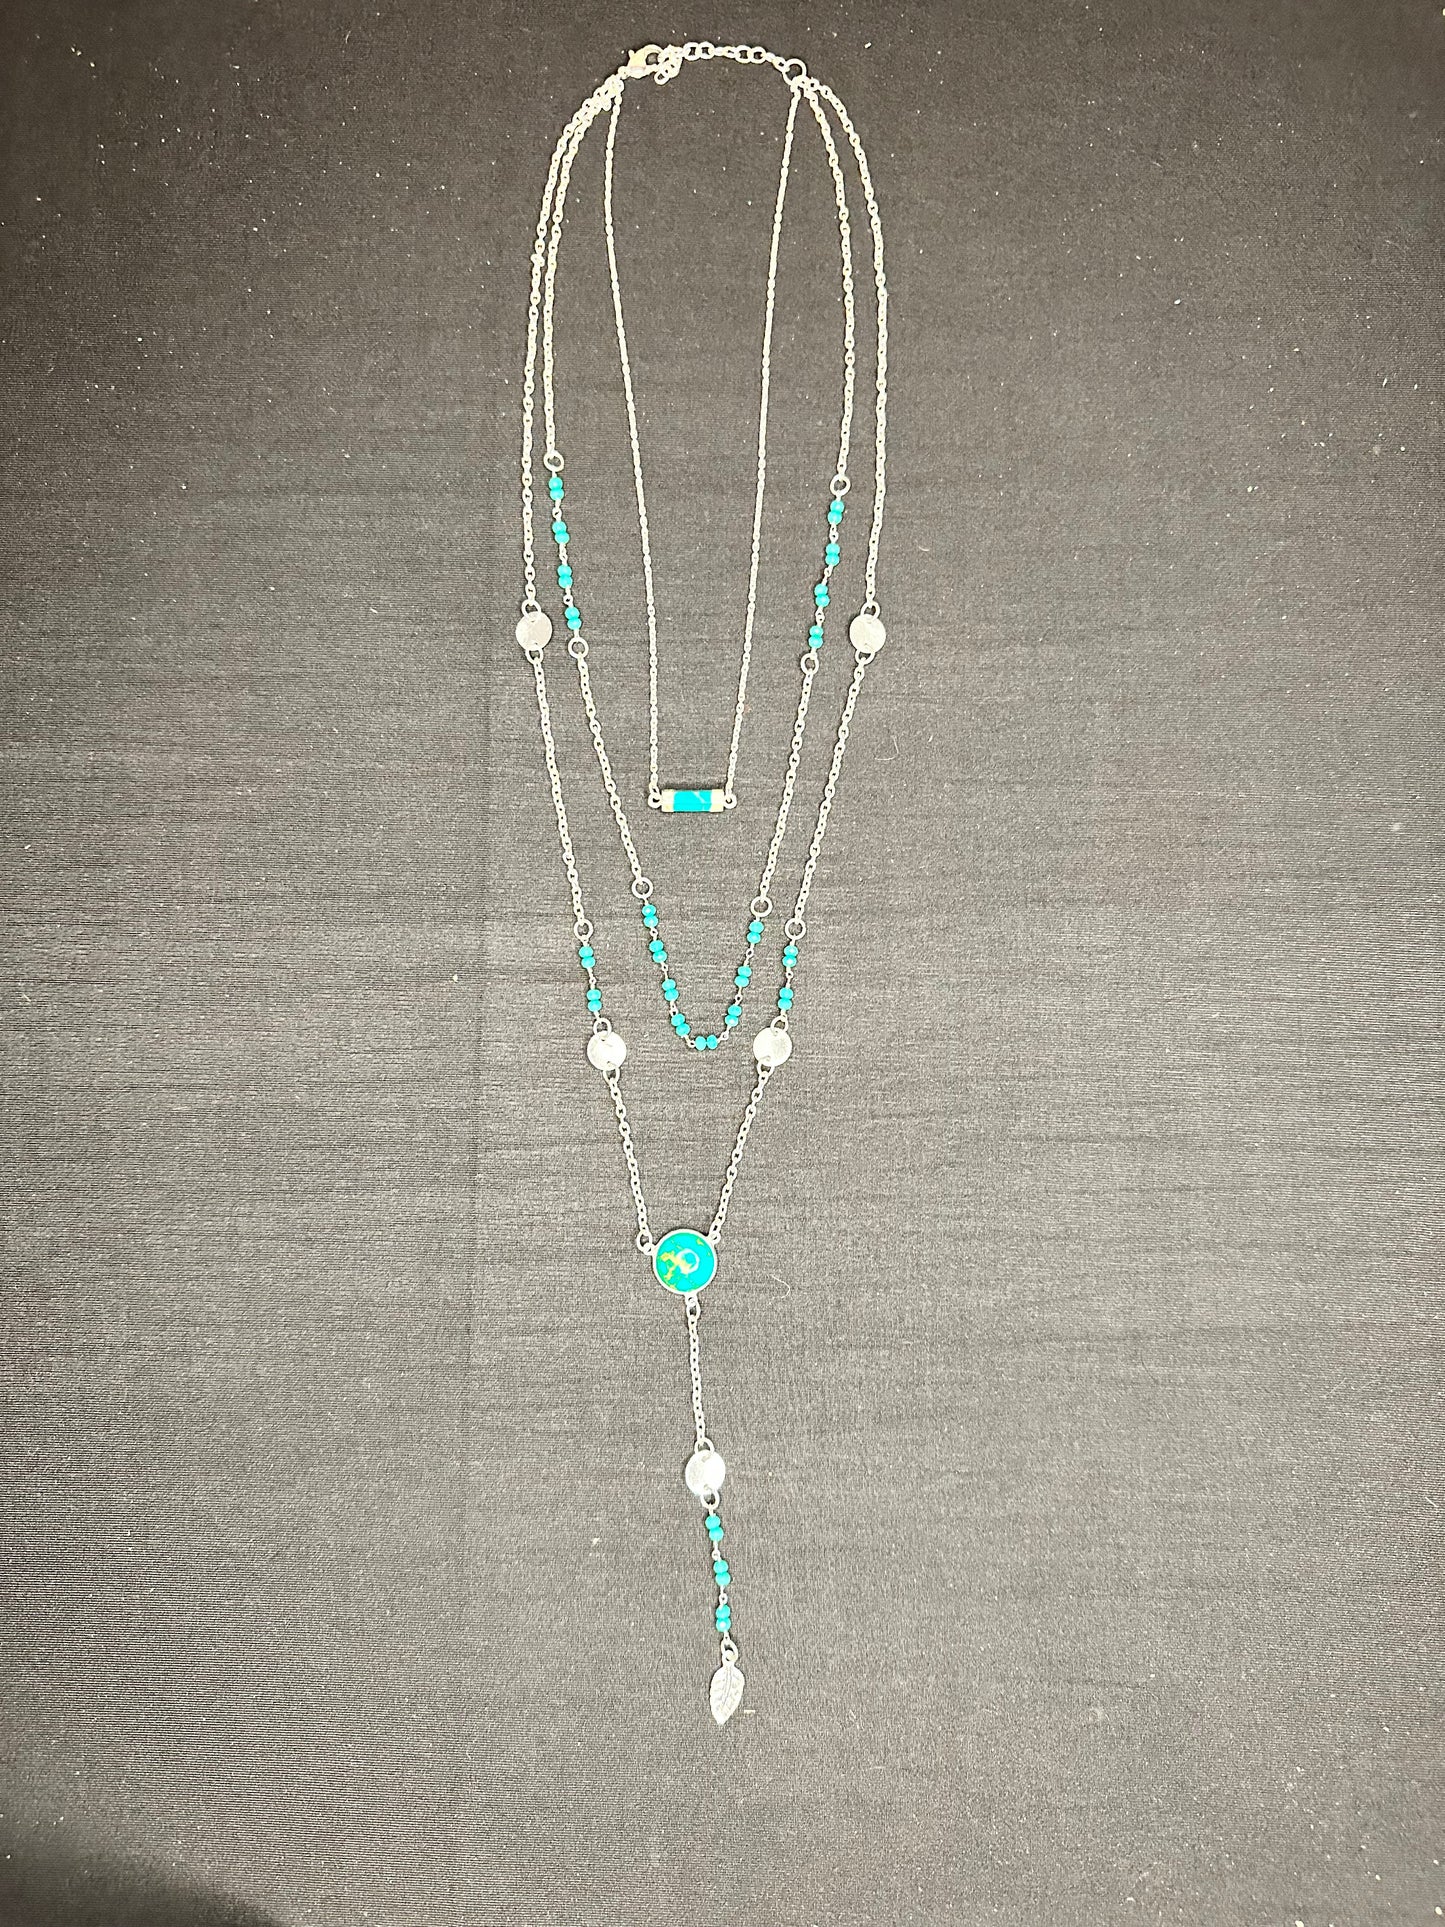 3 layered silver and turquoise necklace 